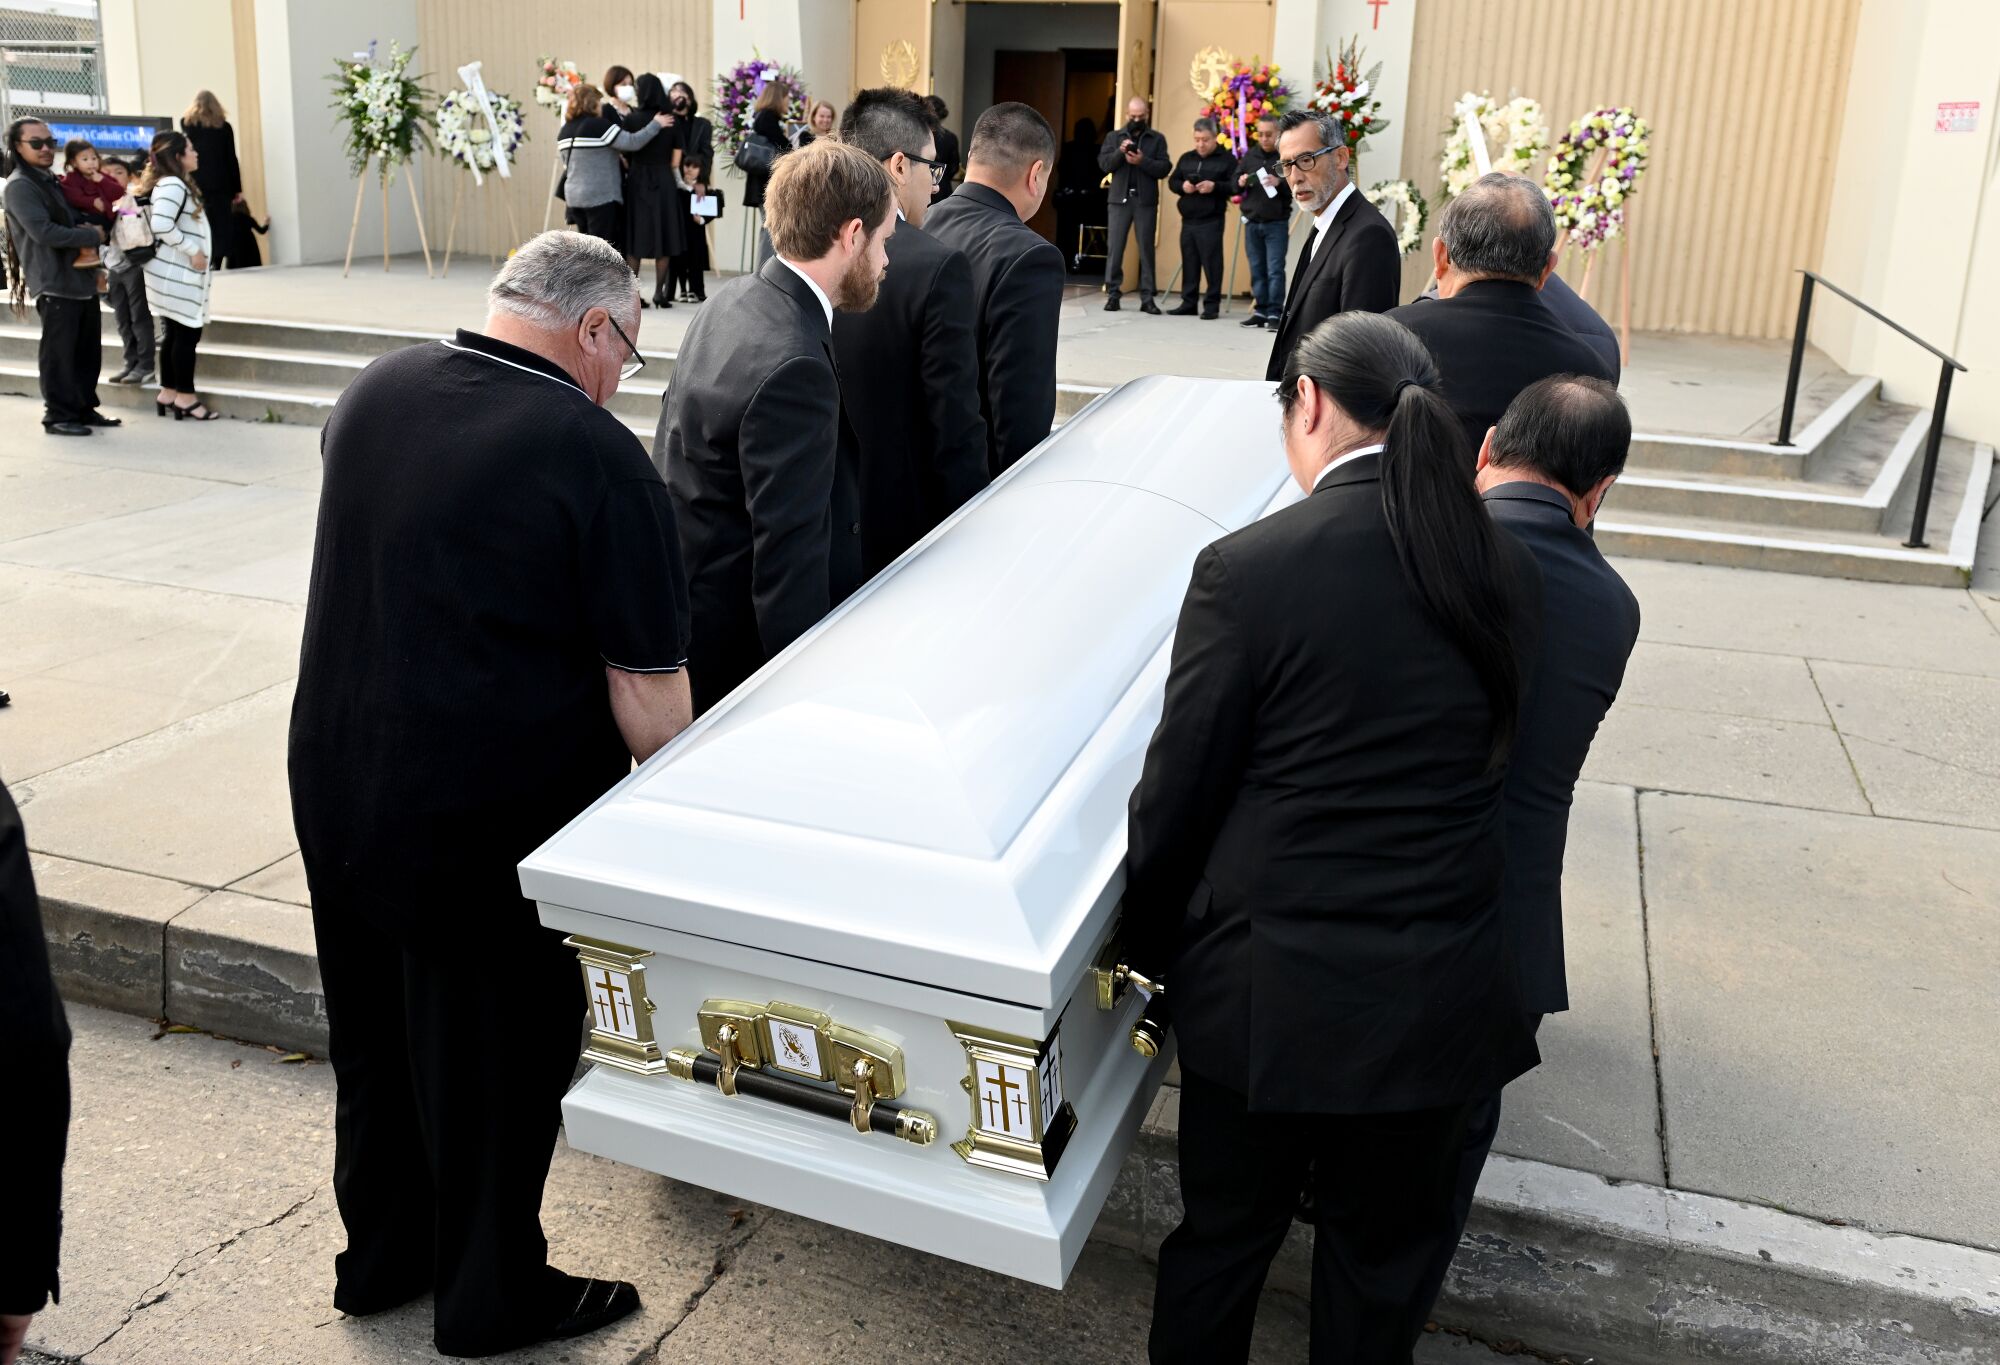 Men carry a casket from the curb onto the sidewalk in front of a church entrance